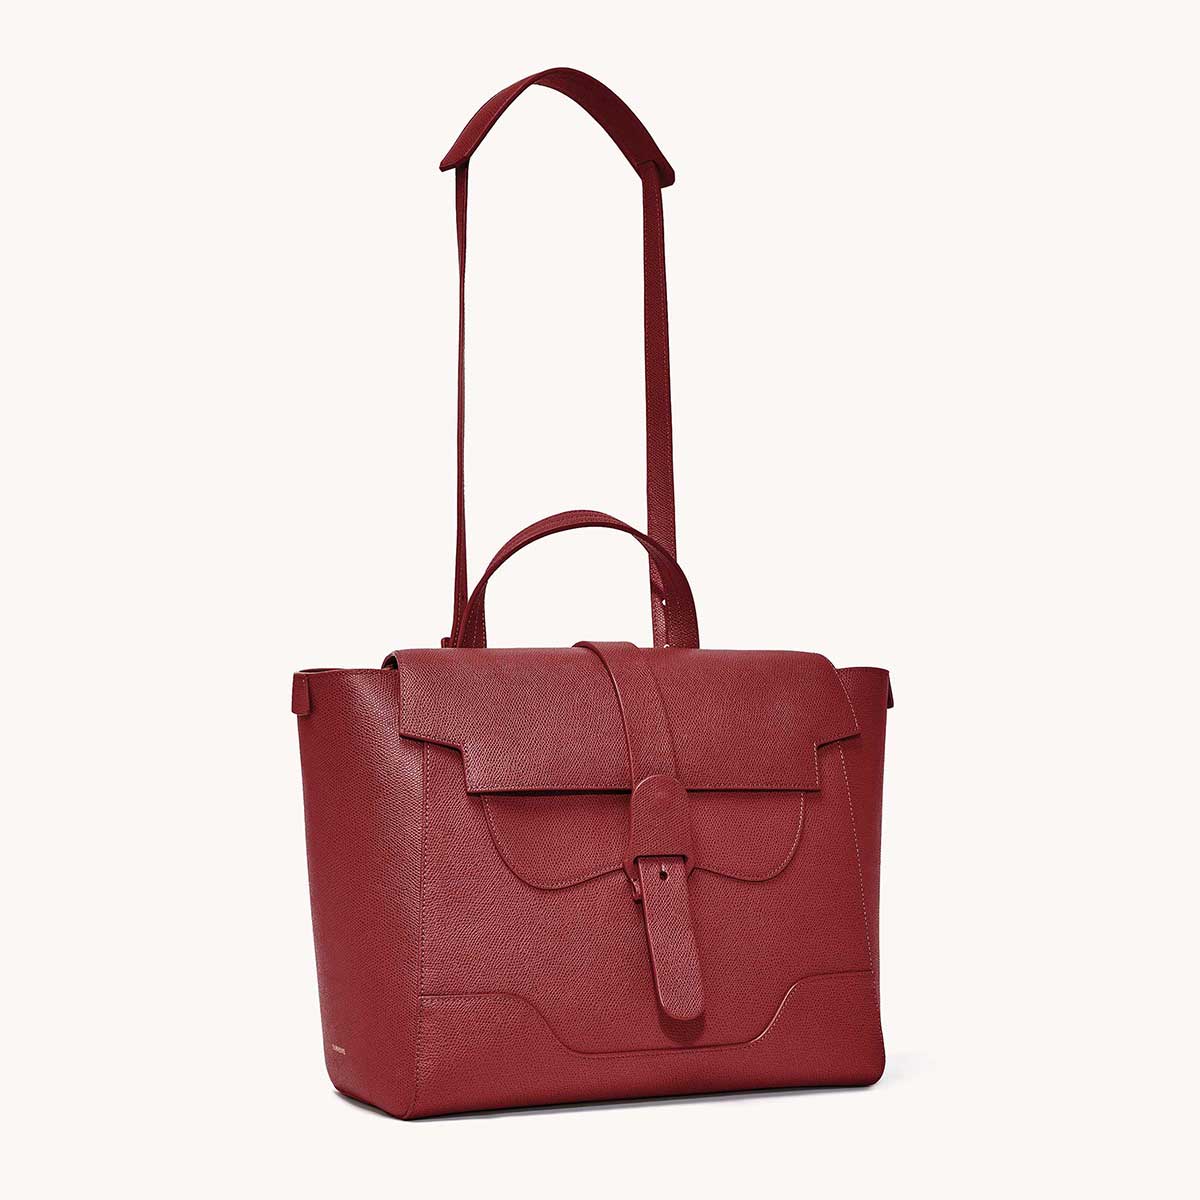 Maestra Bag Pebbled Merlot with Gold Hardware Quarter Angle to Front View